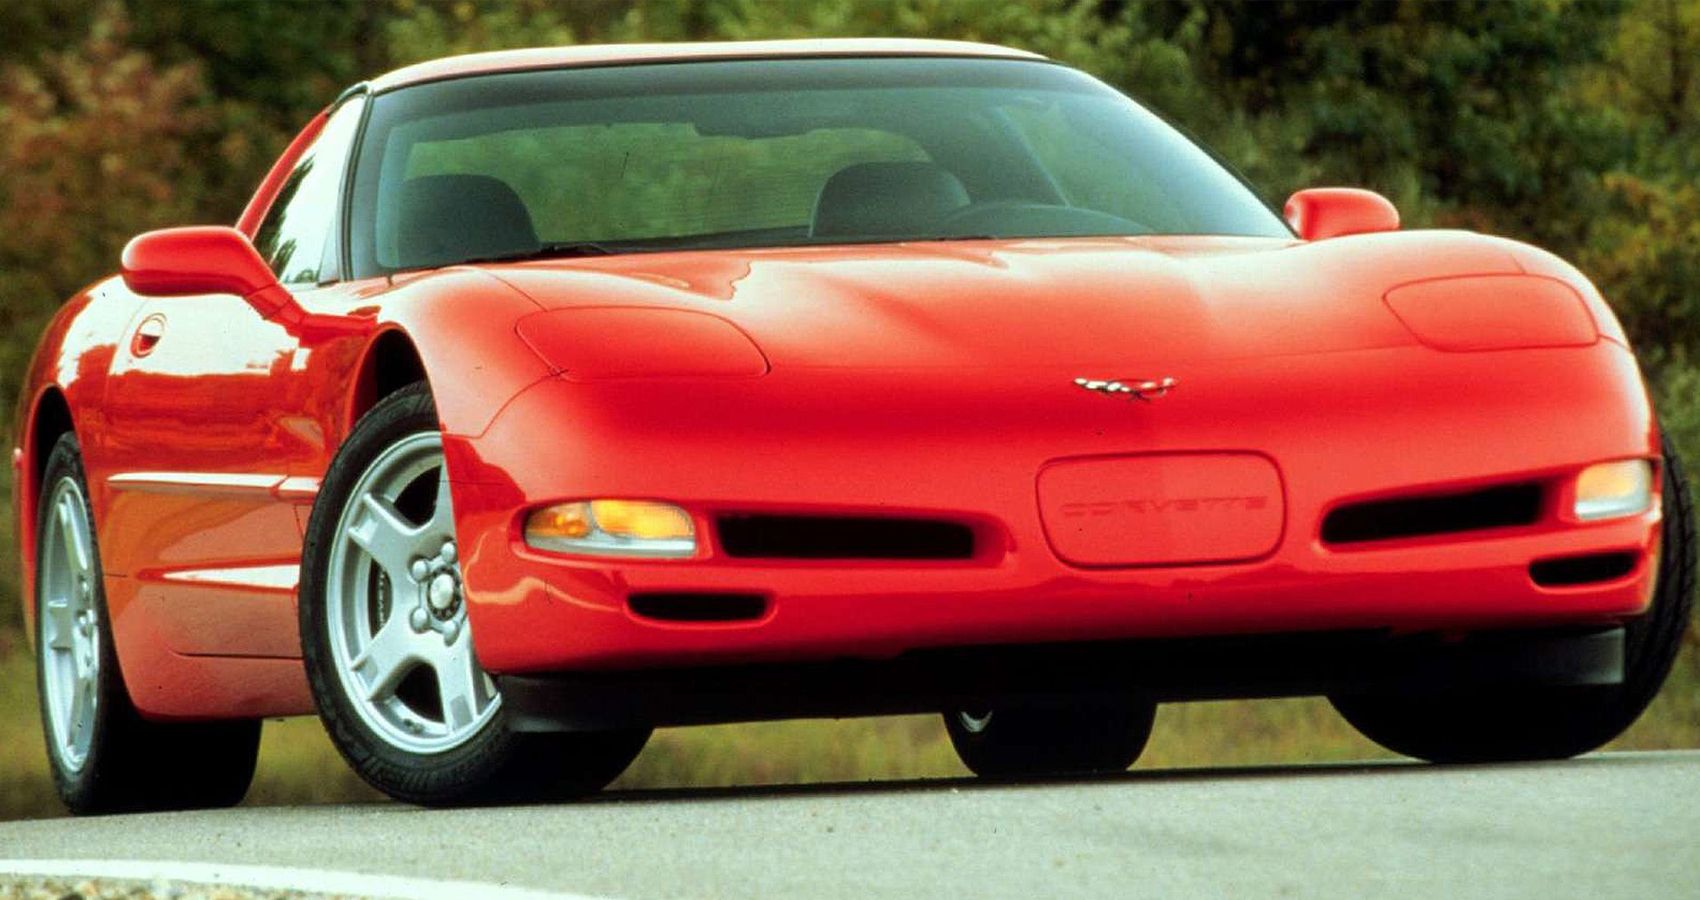 1997 Chevrolet Corvette in Red Front View